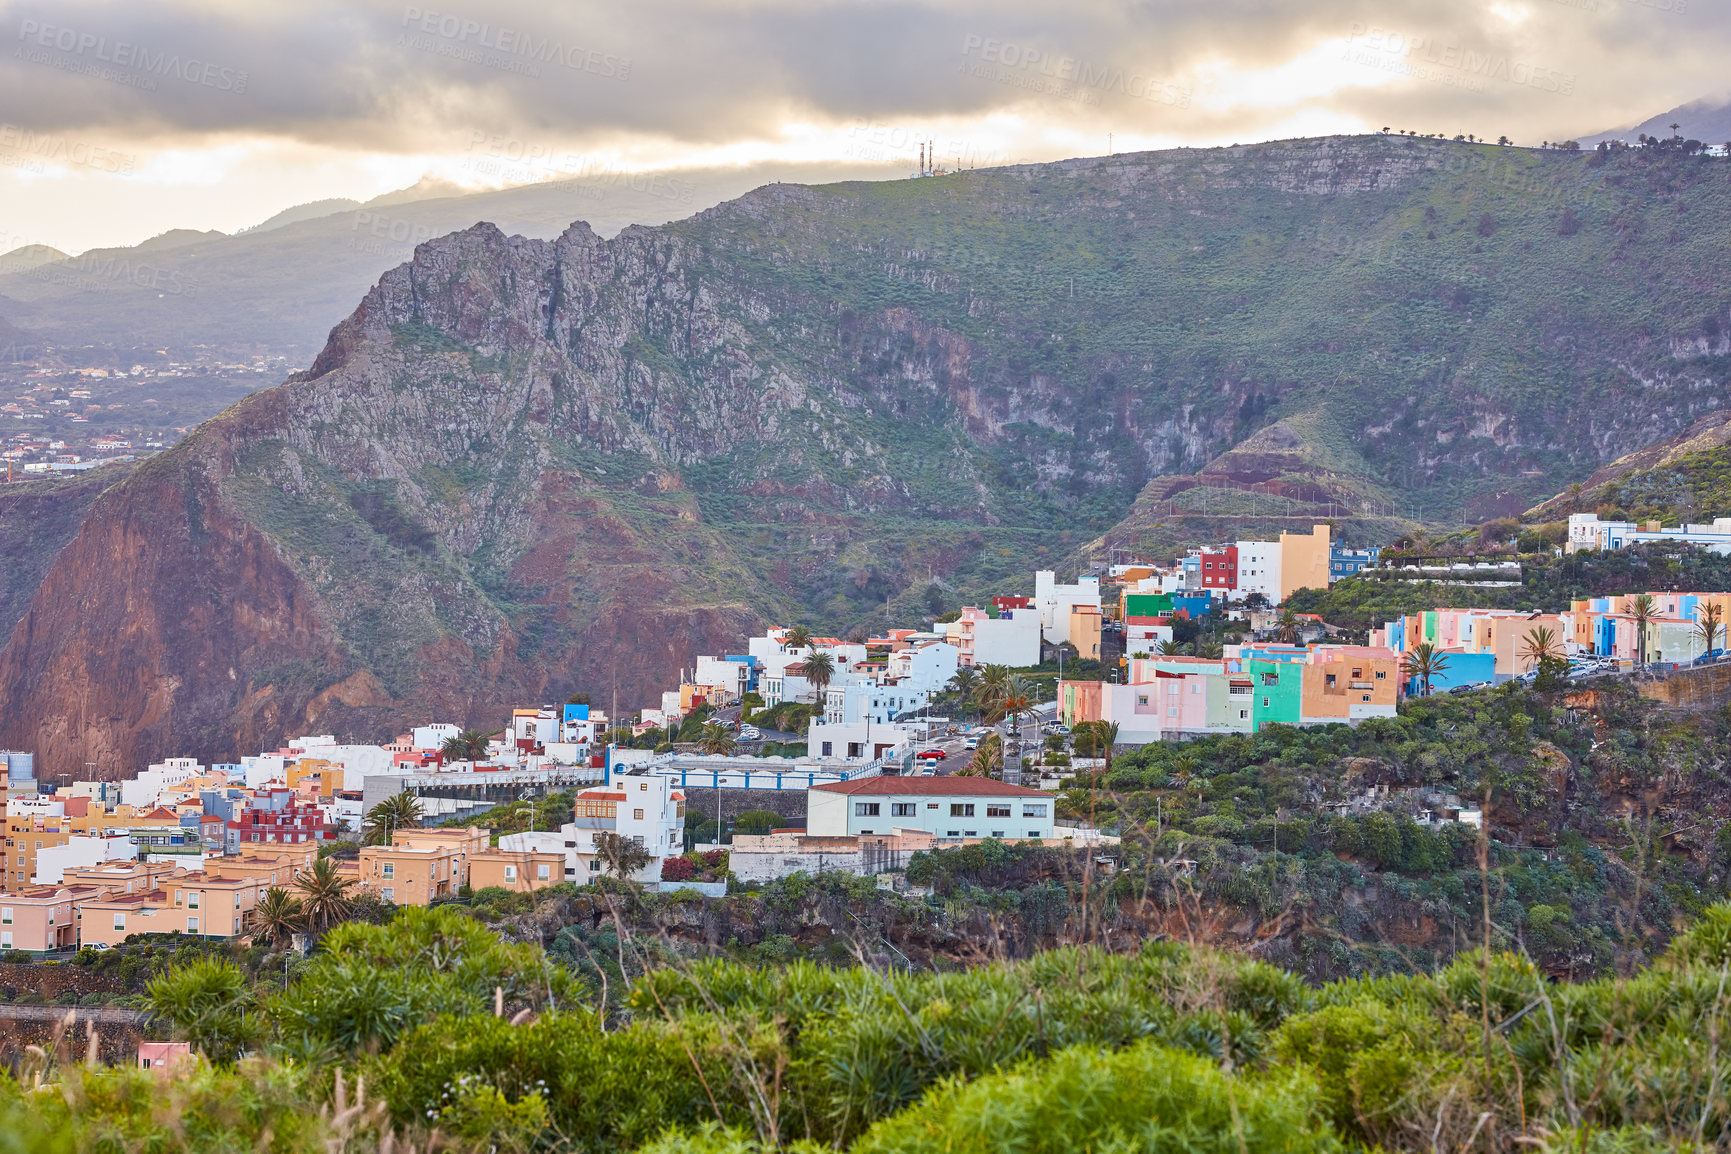 Buy stock photo Historical spanish or colonial architecture in tropical village in tourism destination. City and mountain view of residential houses or buildings in serene hill valley in Santa Cruz, La Palma, Spain.